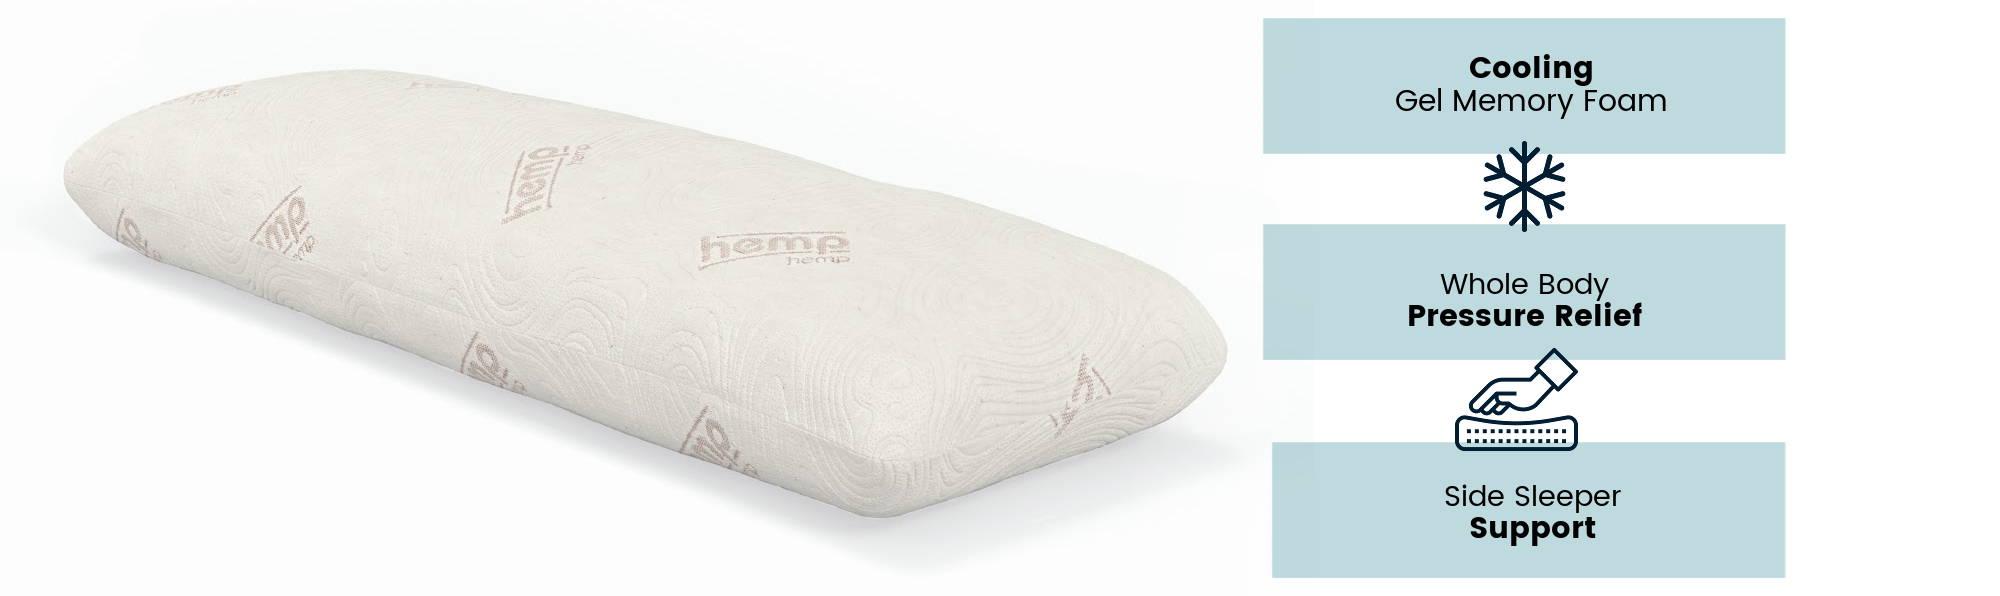 CBD and copper infused body pillow on a white background that has cooling gel memory foam, gives whole body pressure relief, and side sleeping support.